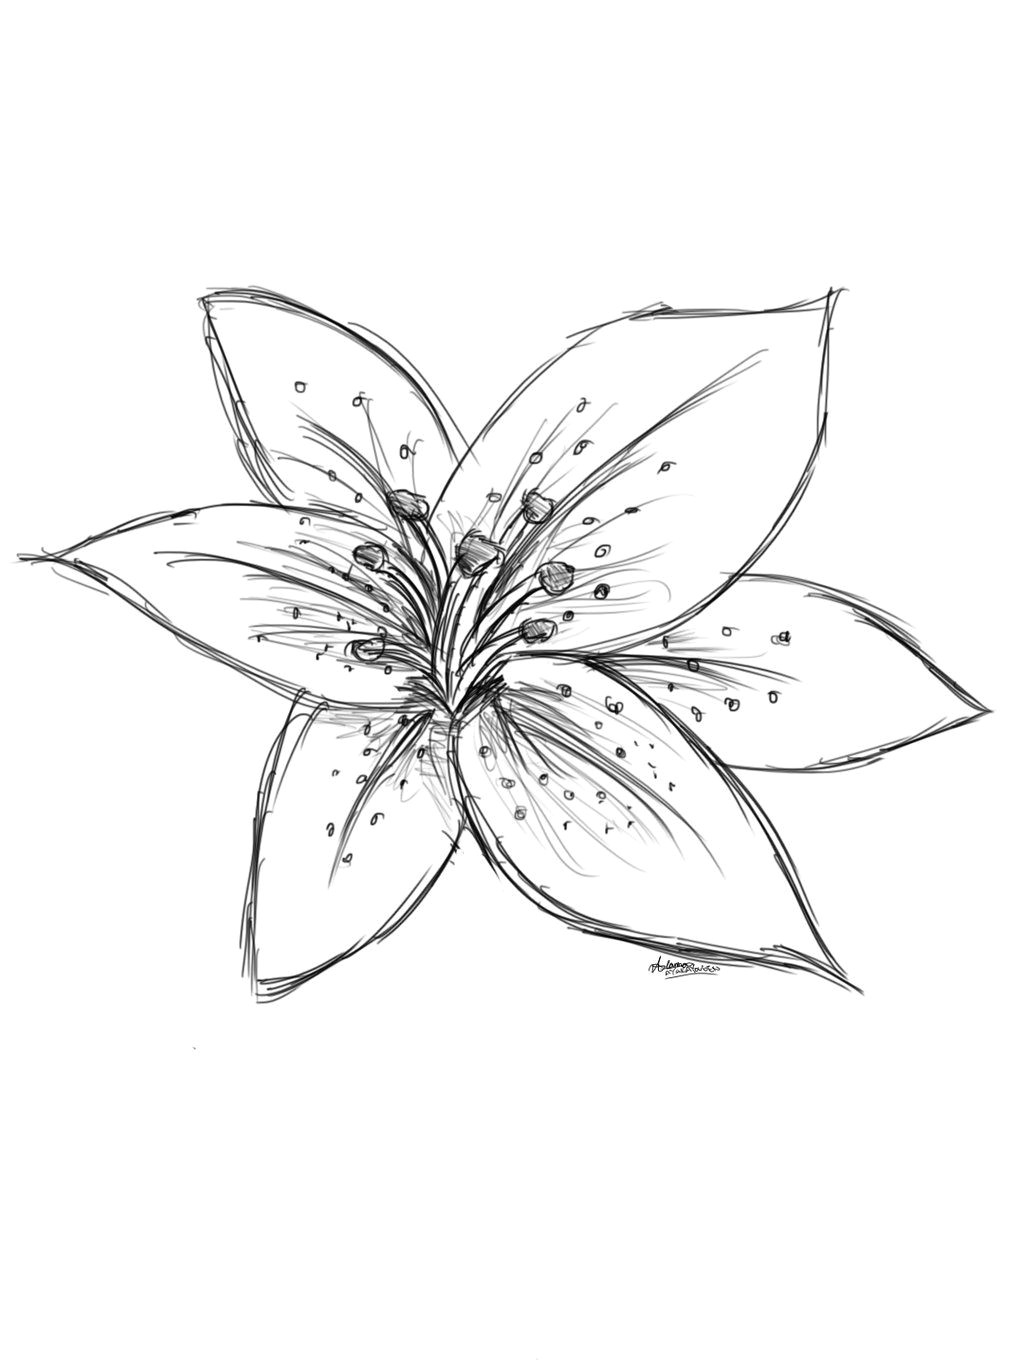 Drawings Of Lilies Flower Image Result for Sketch Lily Flower Craft Watercolor Techniques